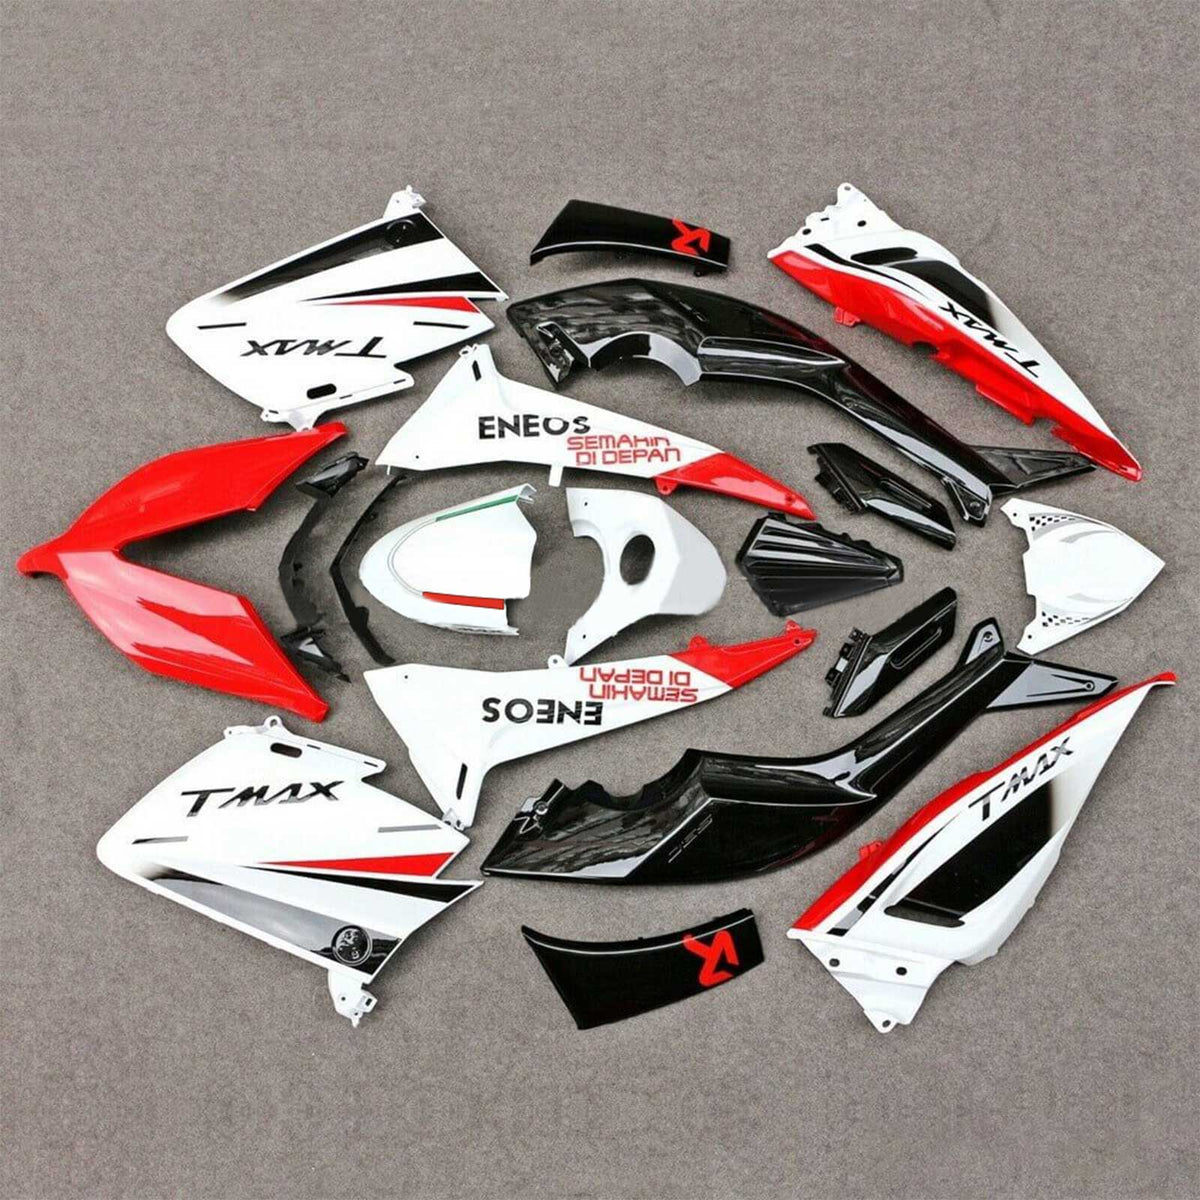 Amotopart 2015-2016 Yamaha T-Max TMAX530 Fairing Red&White Eneos Kit